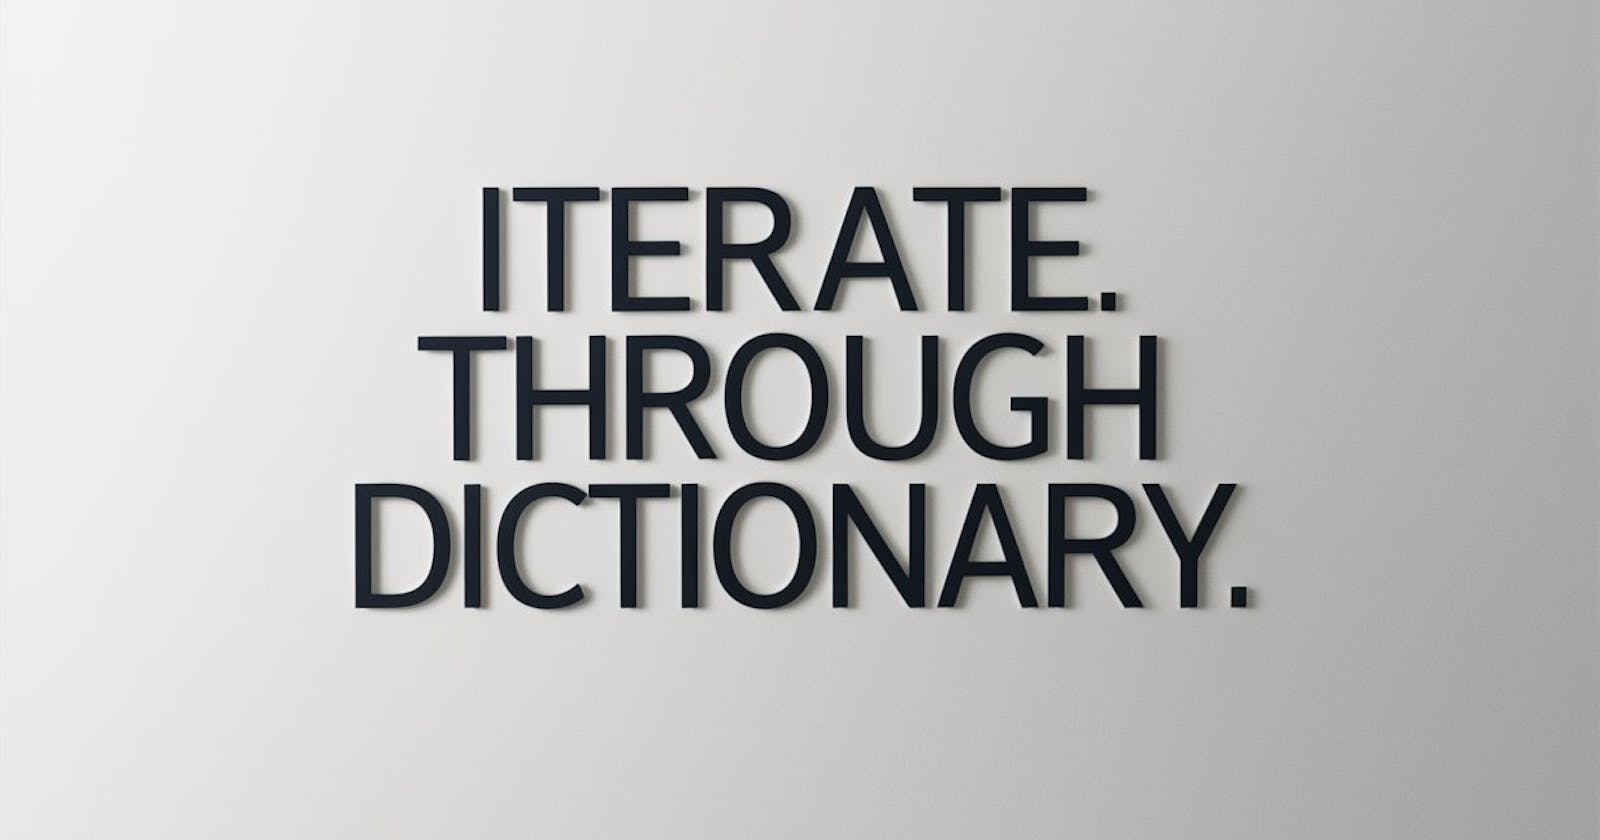 Exploring Methods to Iterate Through Dictionary Keys with 5 Examples